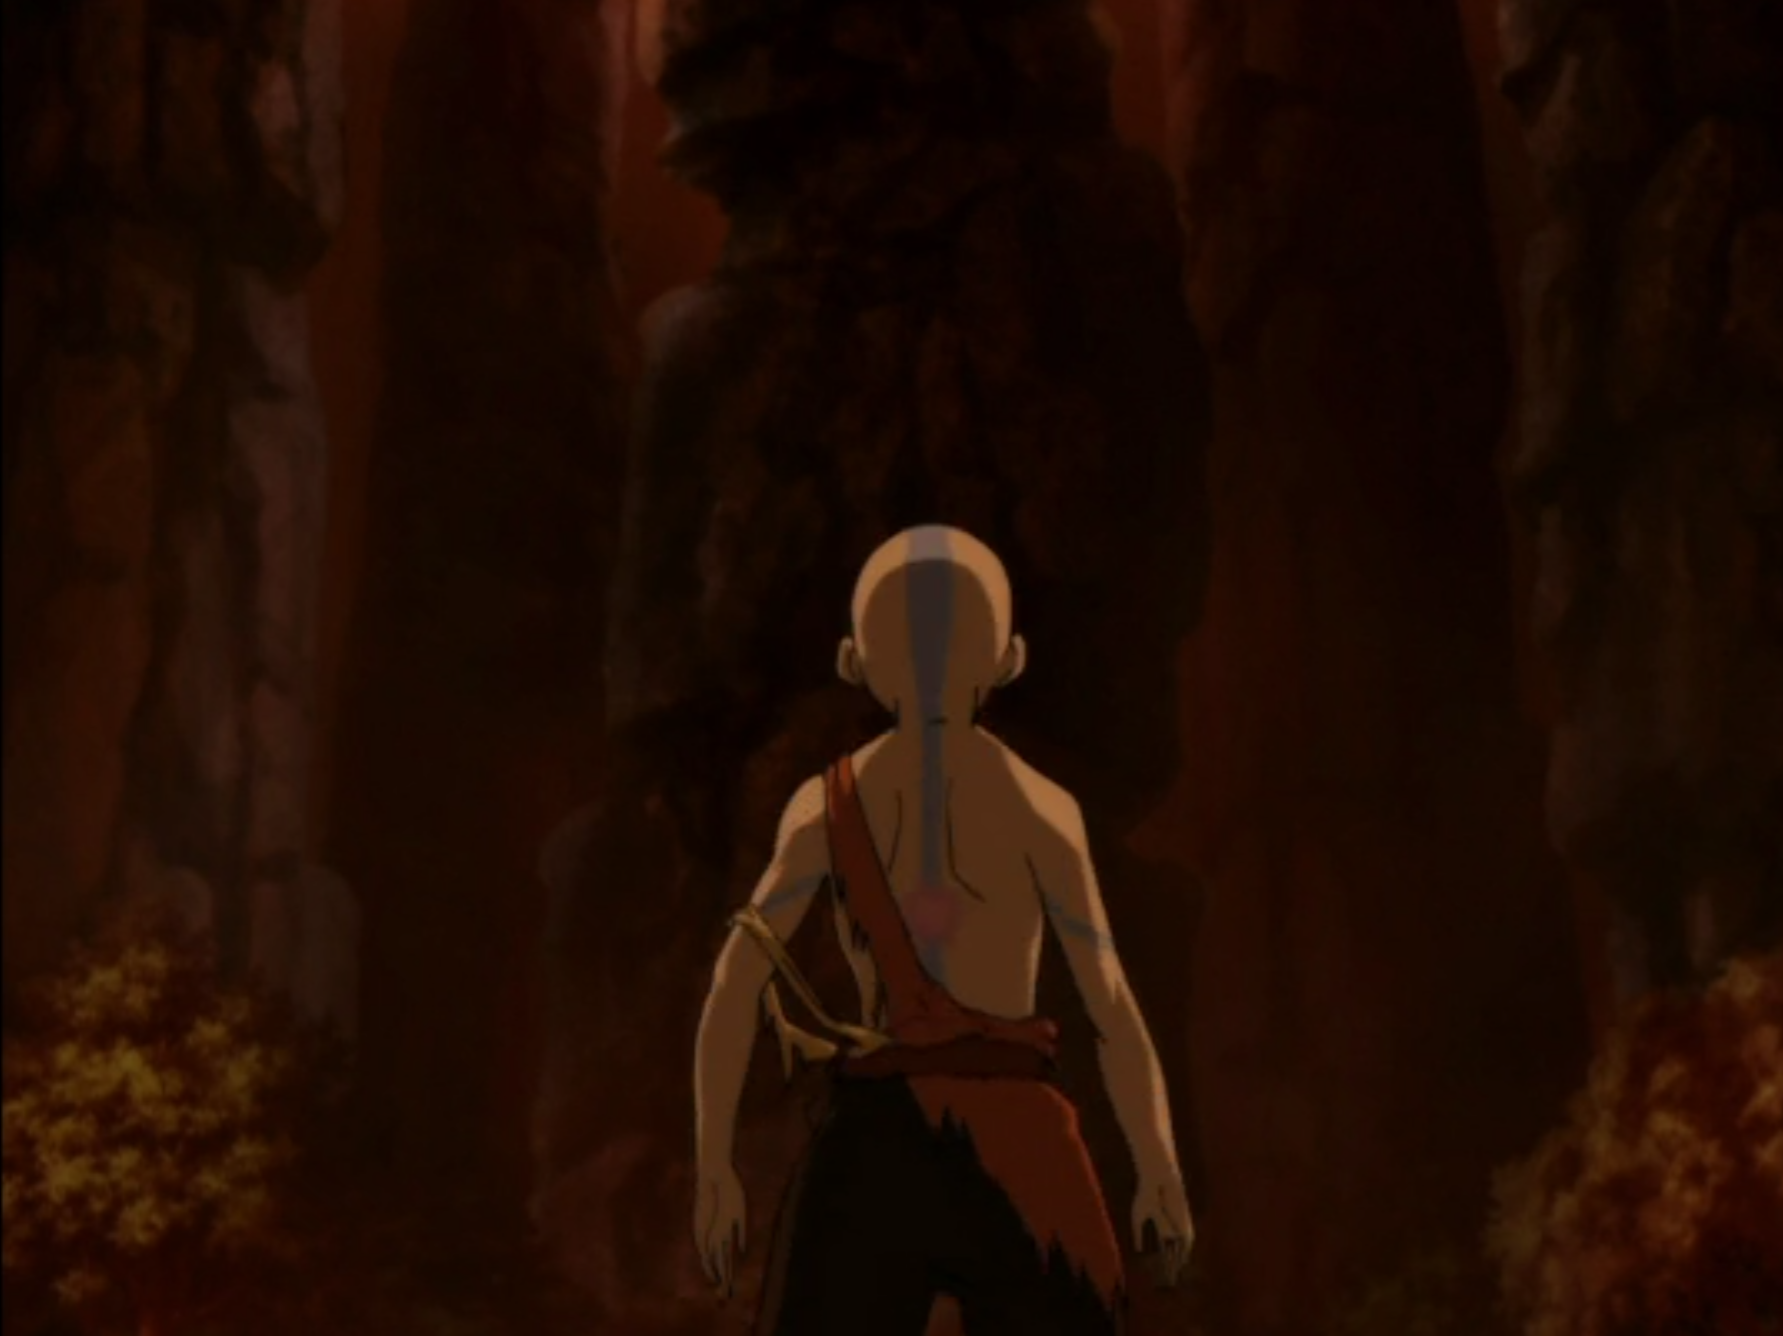 NickALive Avatar The Last Airbender Was Technically Canceled In  Between Seasons 2  3